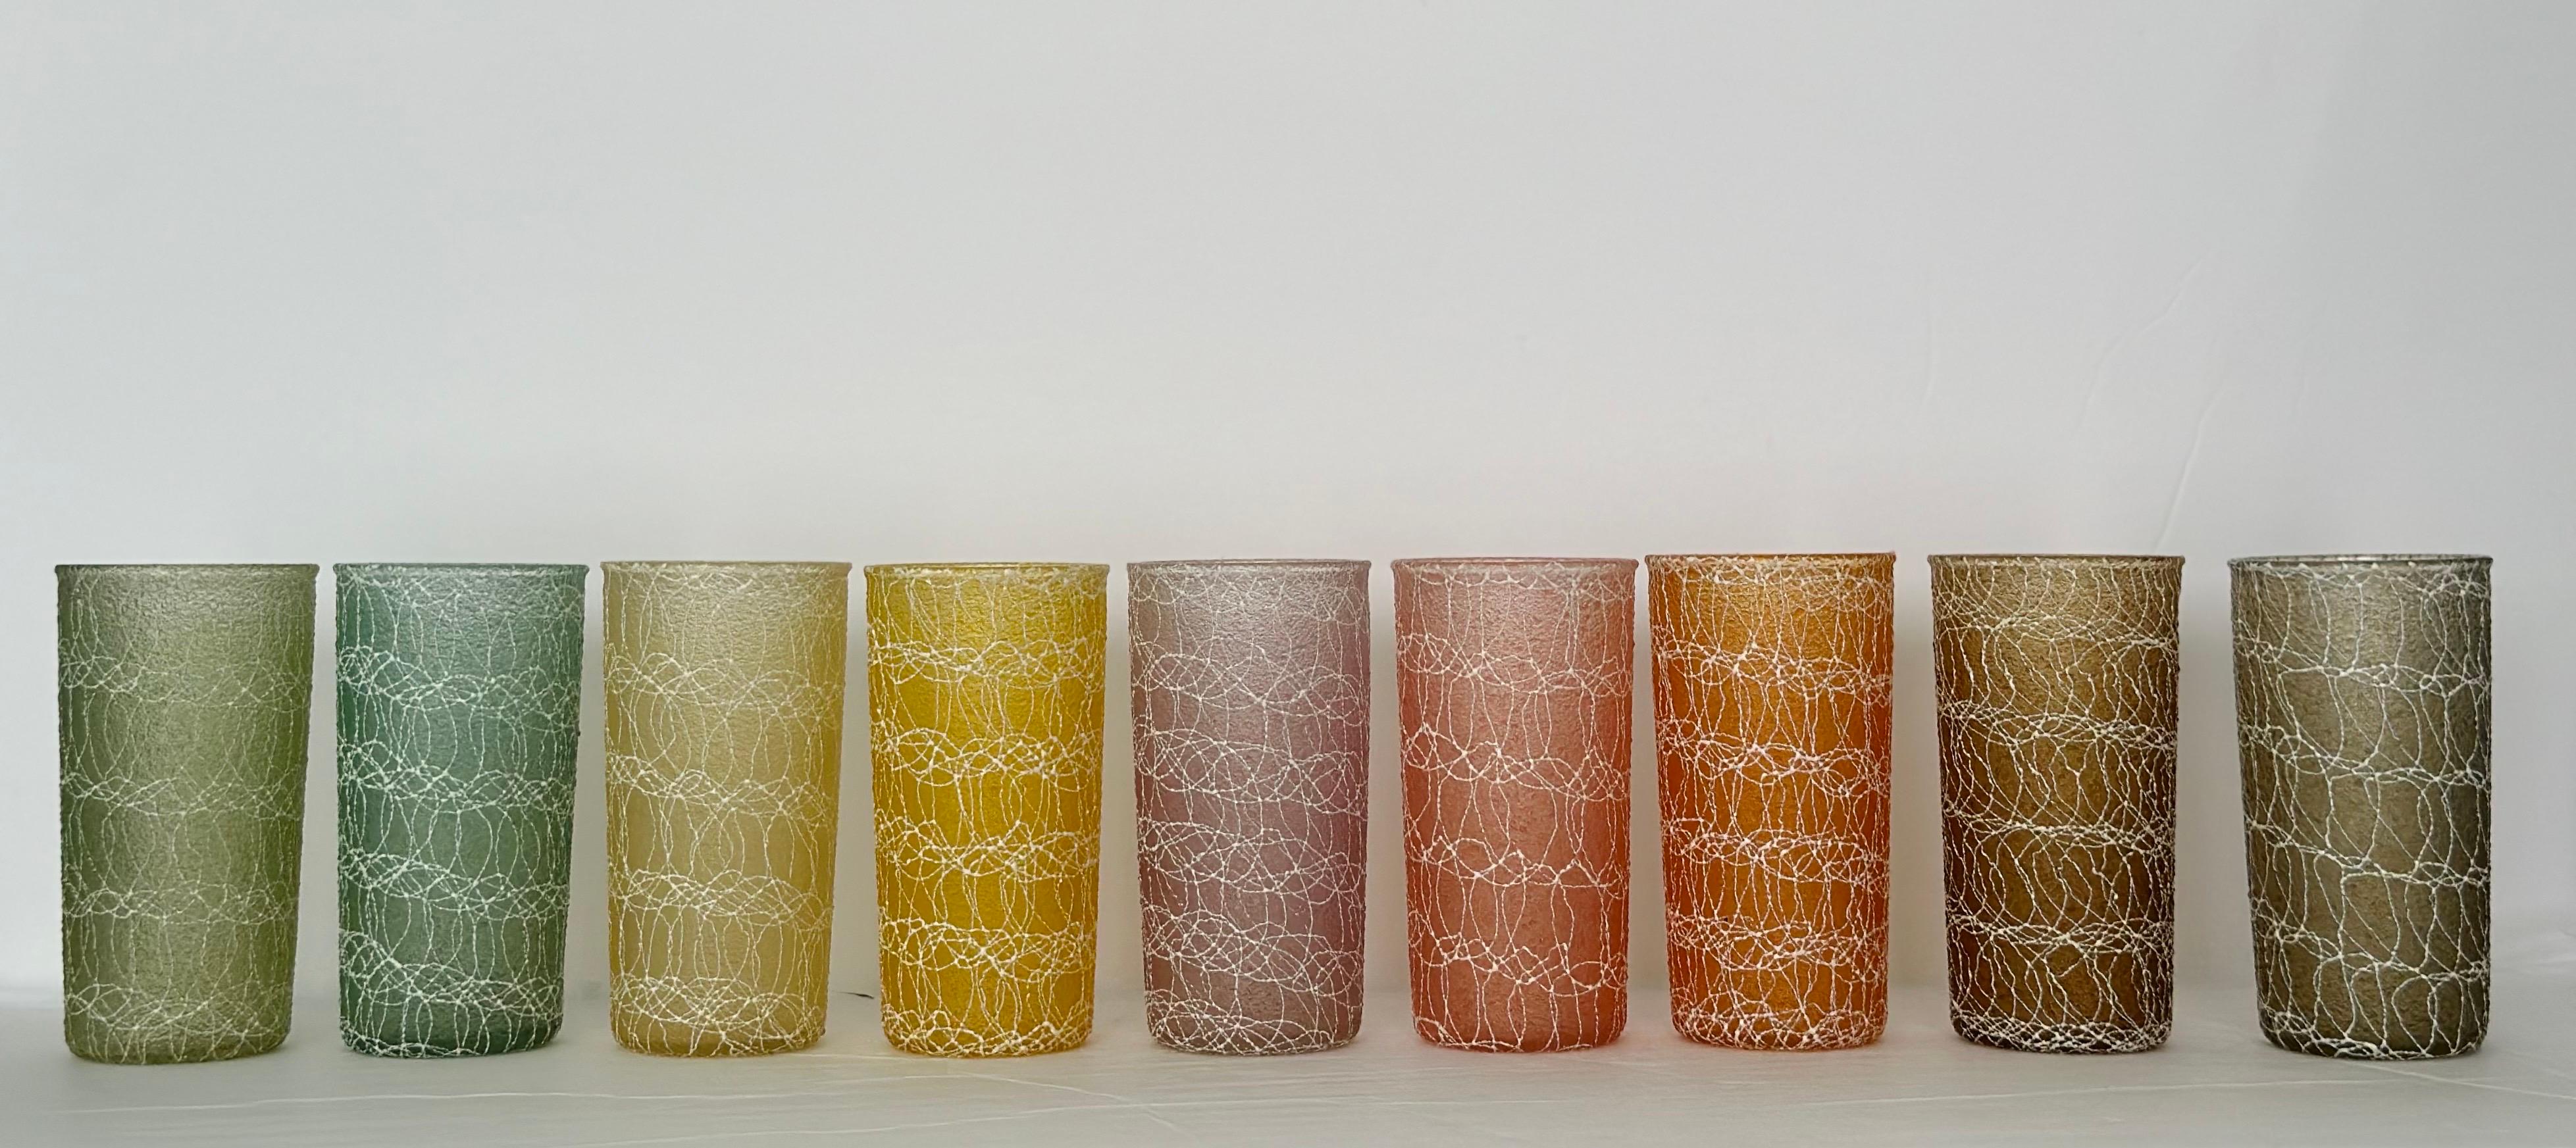 We are very pleased to offer a vintage set of nine spaghetti tumblers, circa the 1960s. This distinctive type of drinkware is characterized by their unique texture, which resembles strands or swirls of spaghetti.  Texture is created by applying